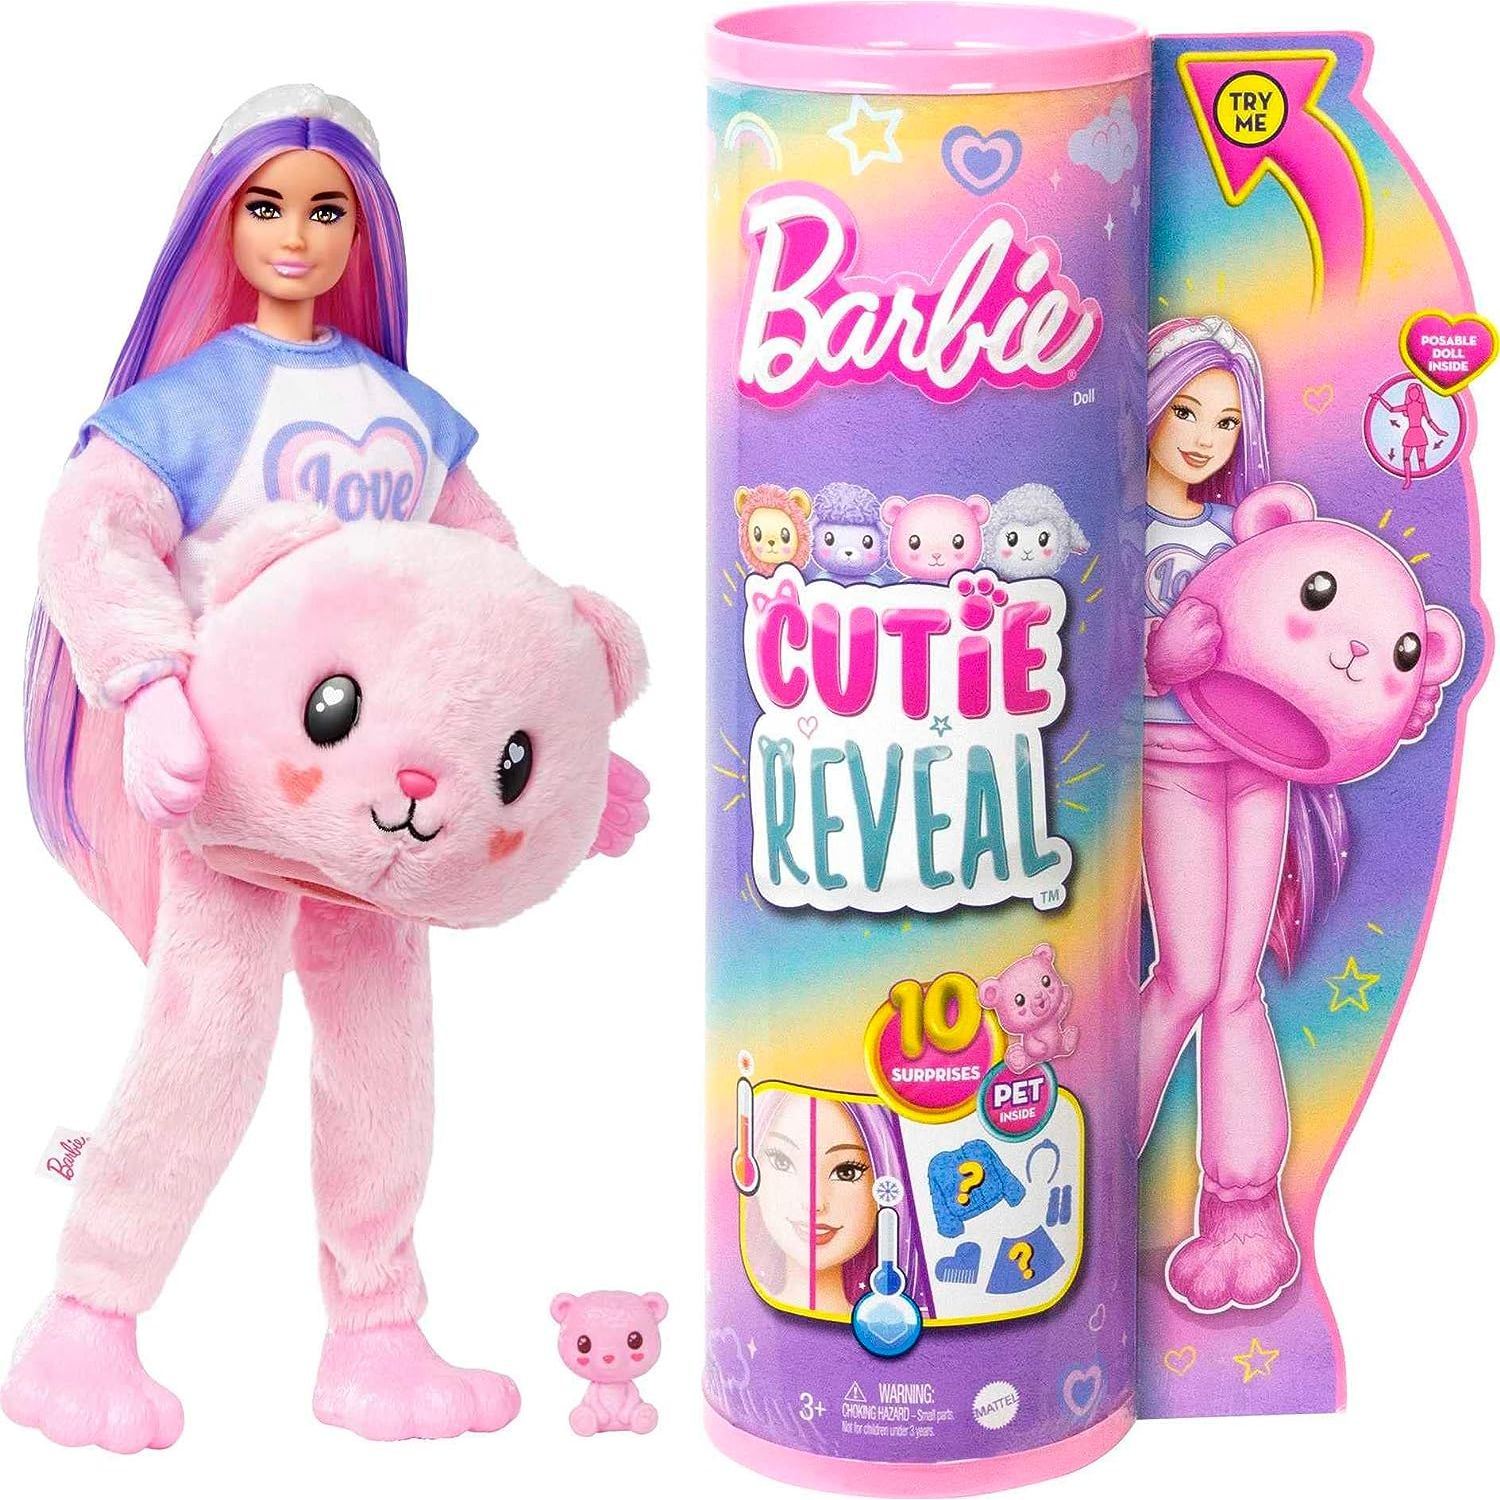 Barbie Cutie Reveal Doll with Pink Hair & Teddy Bear Costume, 10 Suprises Include Accessories & Pet